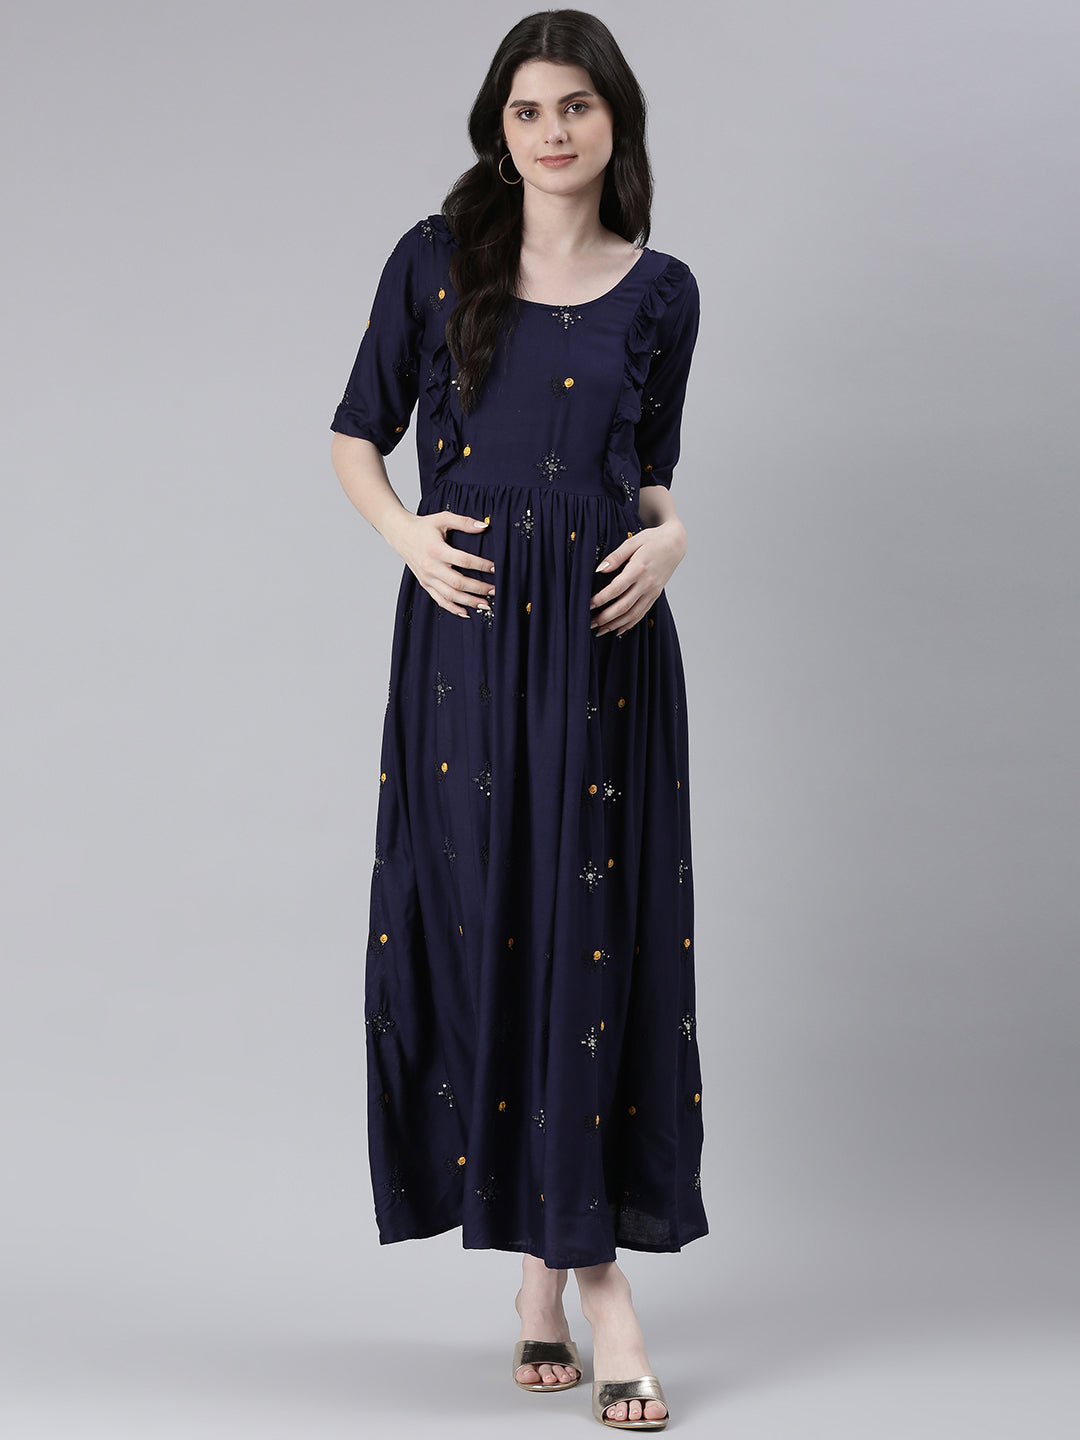 Navy blue Embellished Embroidered Ruffled Maternity Fit & Flare Maxi Ethnic Dress